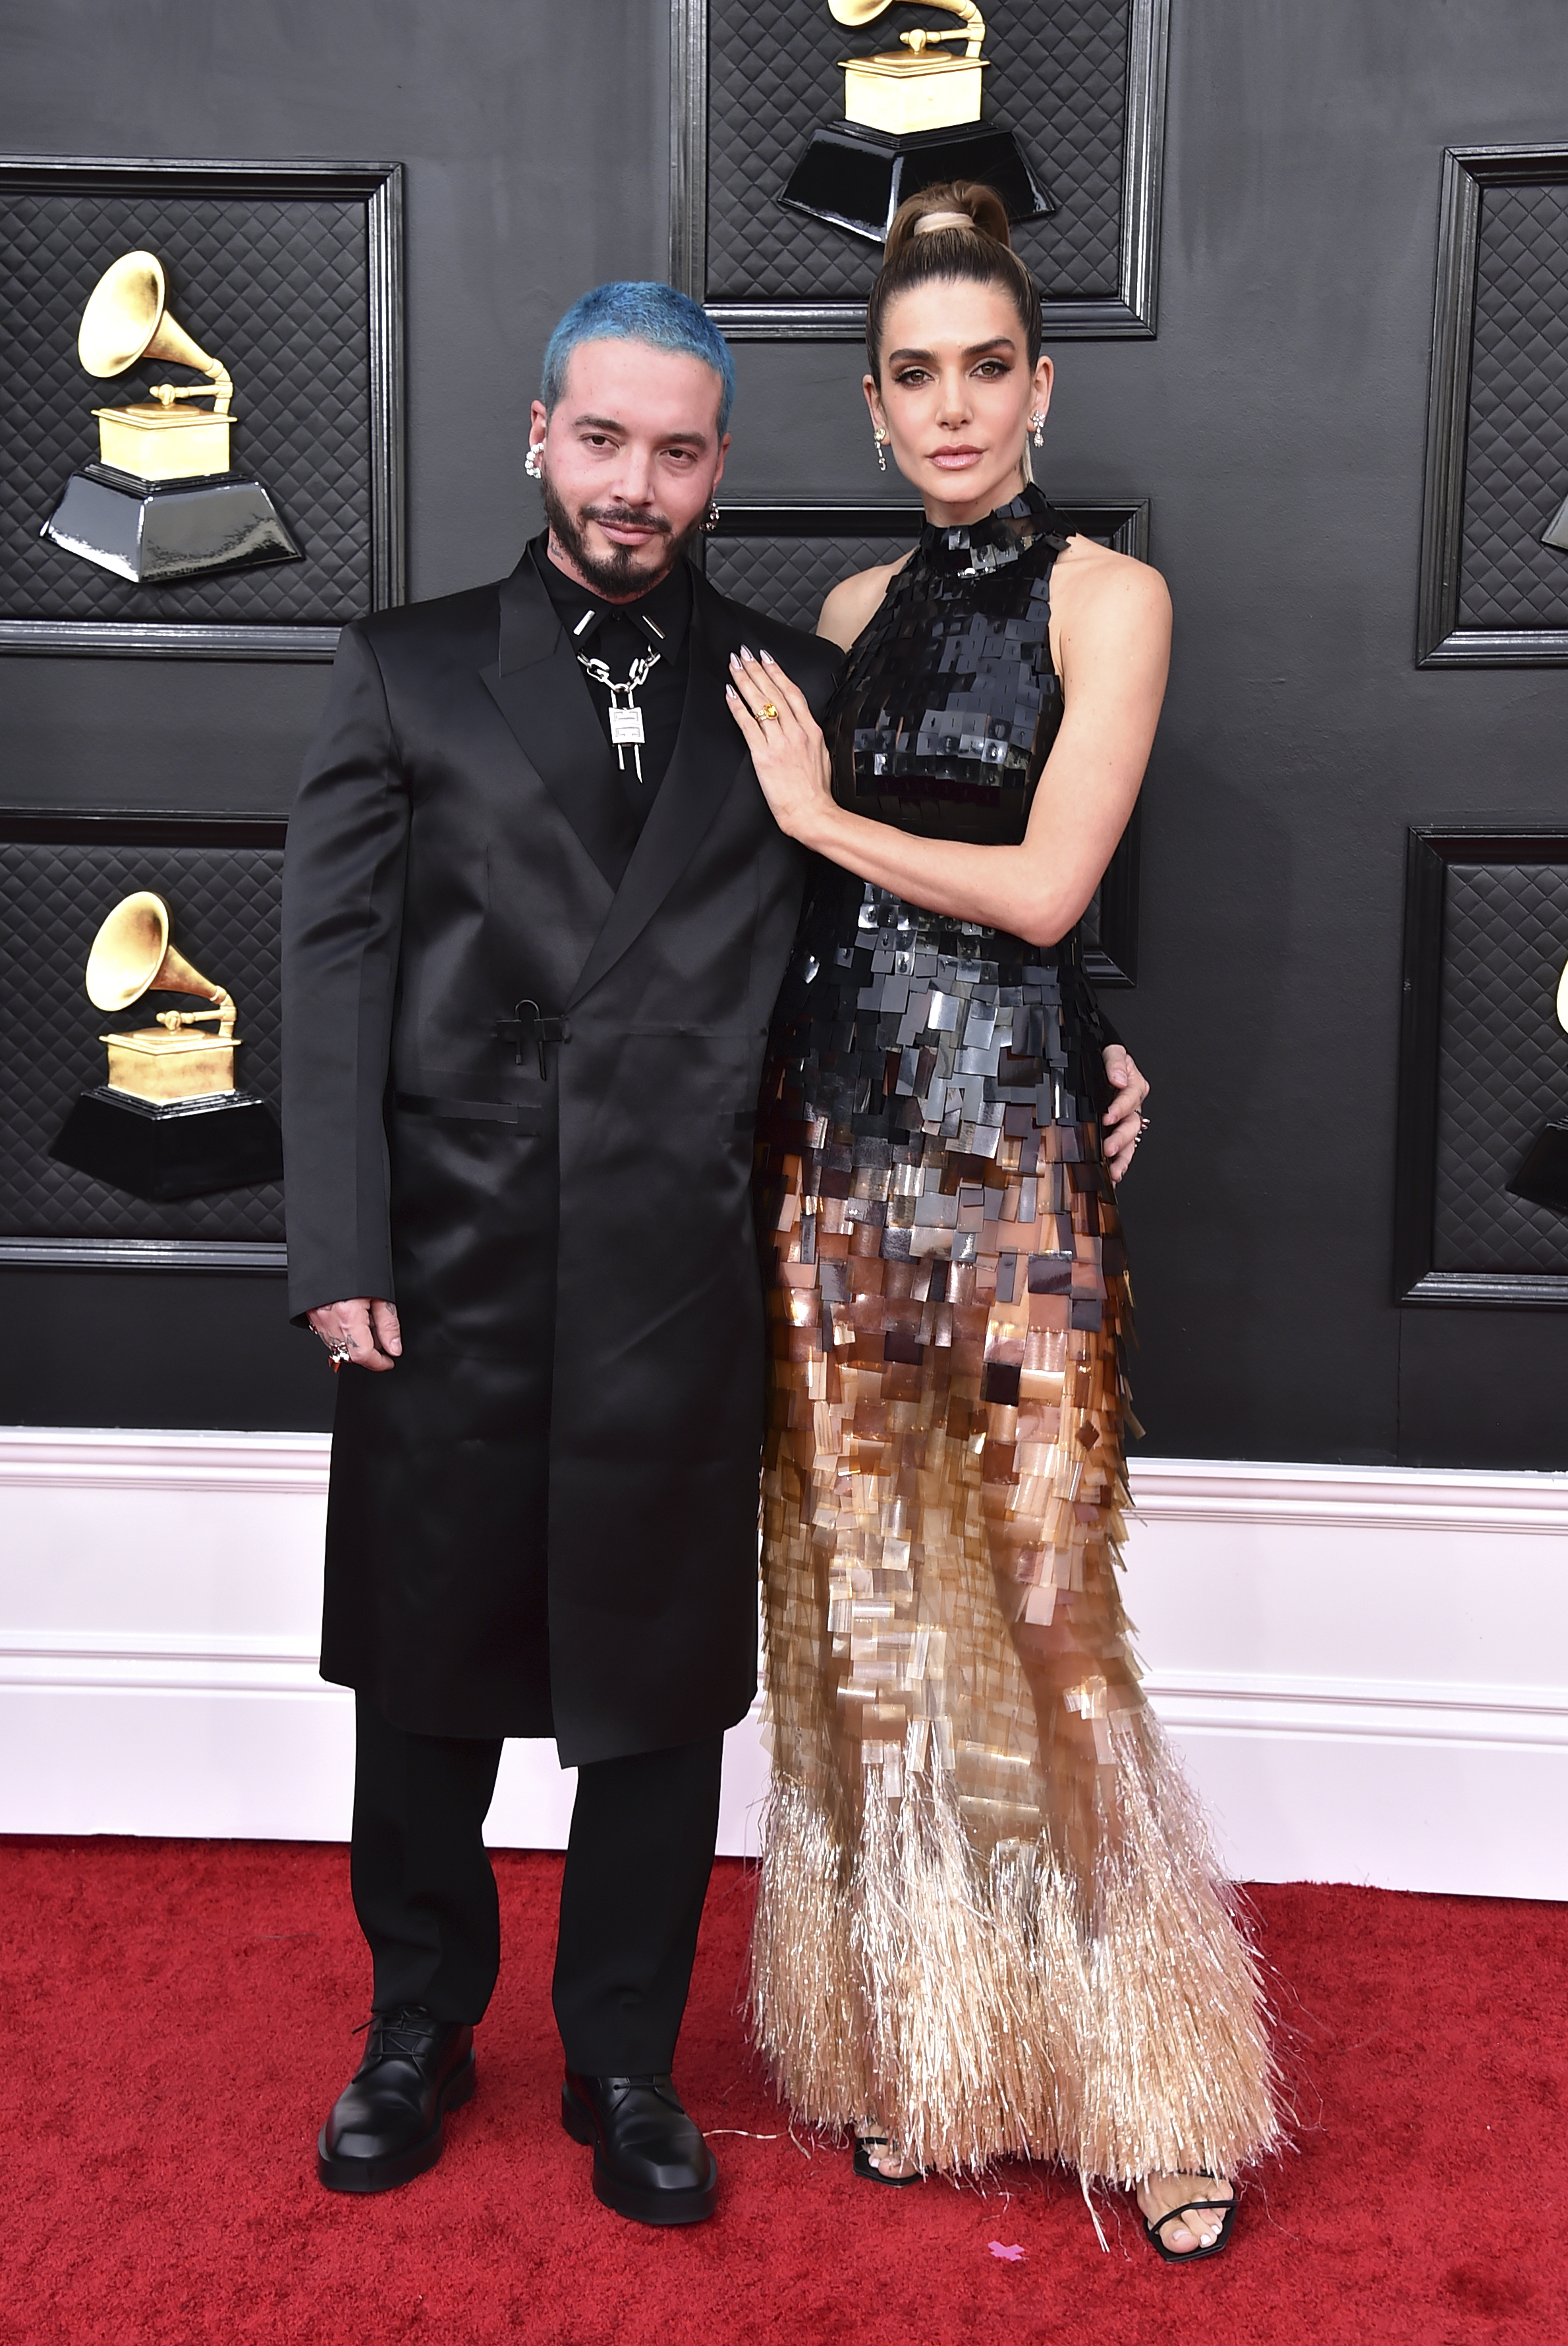 J Balvin and Valentina Ferrer  stand on the red carpet arm in arm. balvin has bright blue short cropped hair